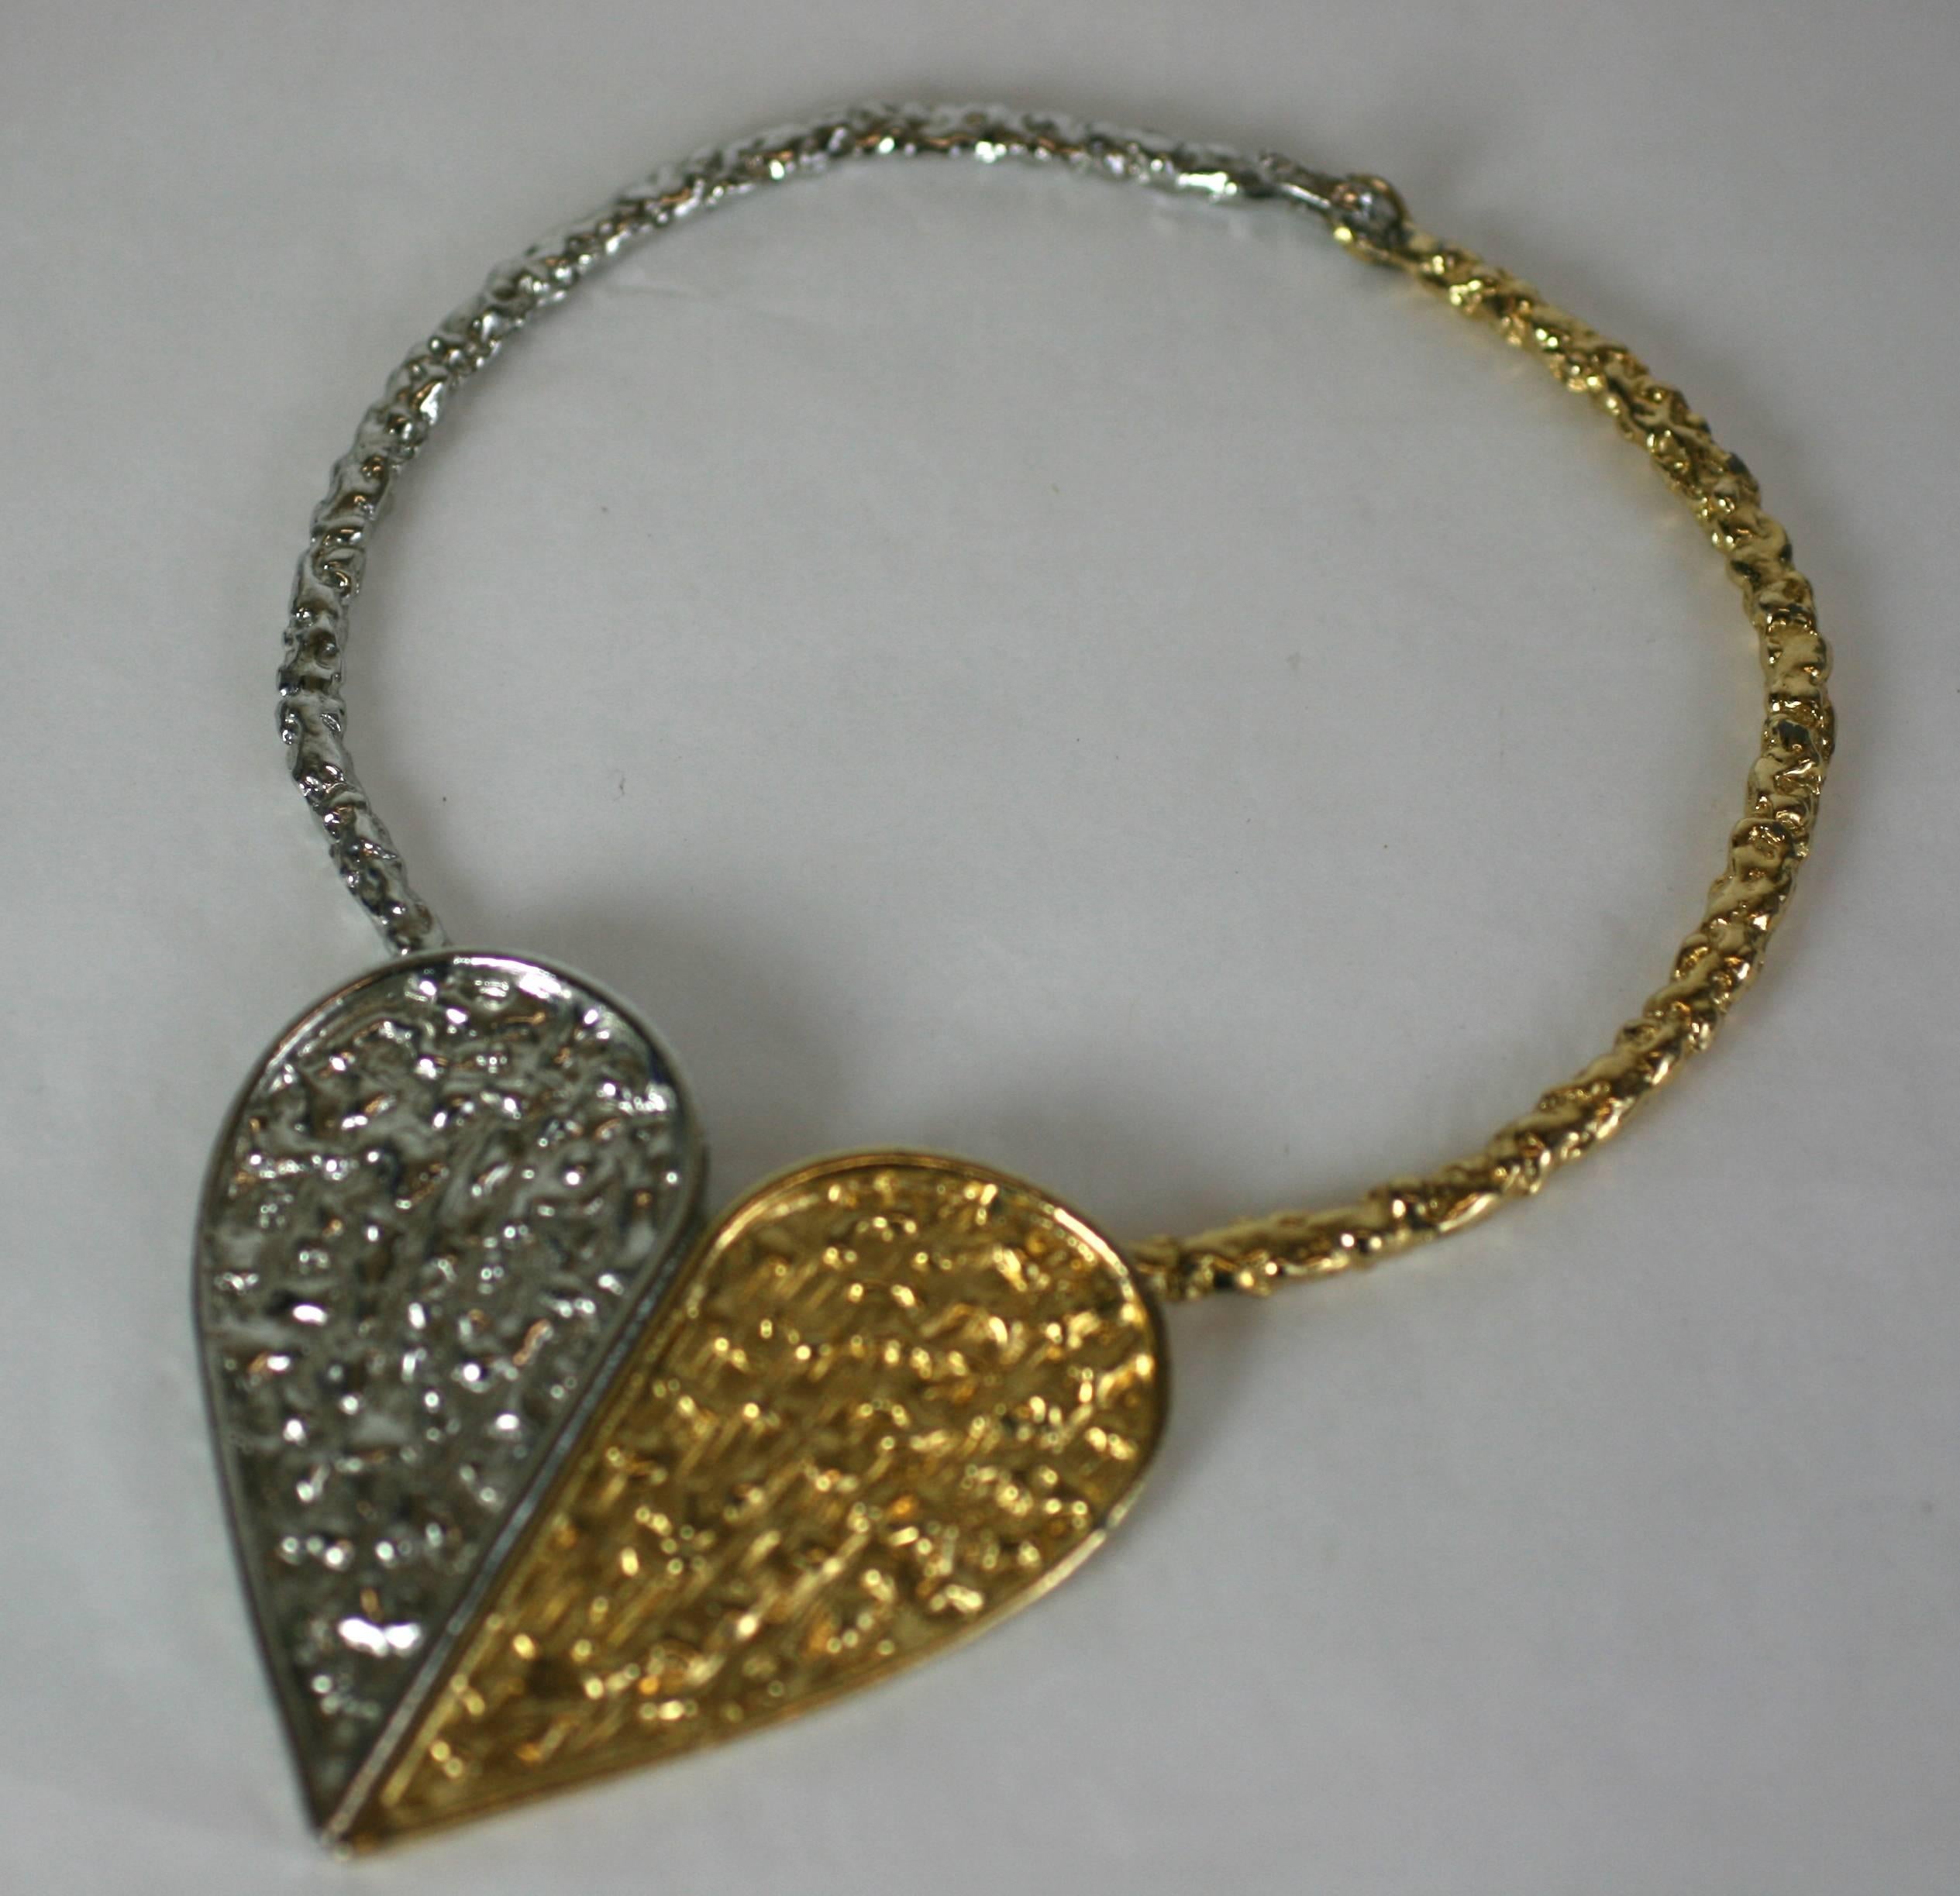 Brutalist Heart Pendant in silver and gold toned metal. Surely Inspired by YSL heart jewelry of the period. 
Designed in the Brutalist style with striking results. 
1970's USA. Heart measures 3